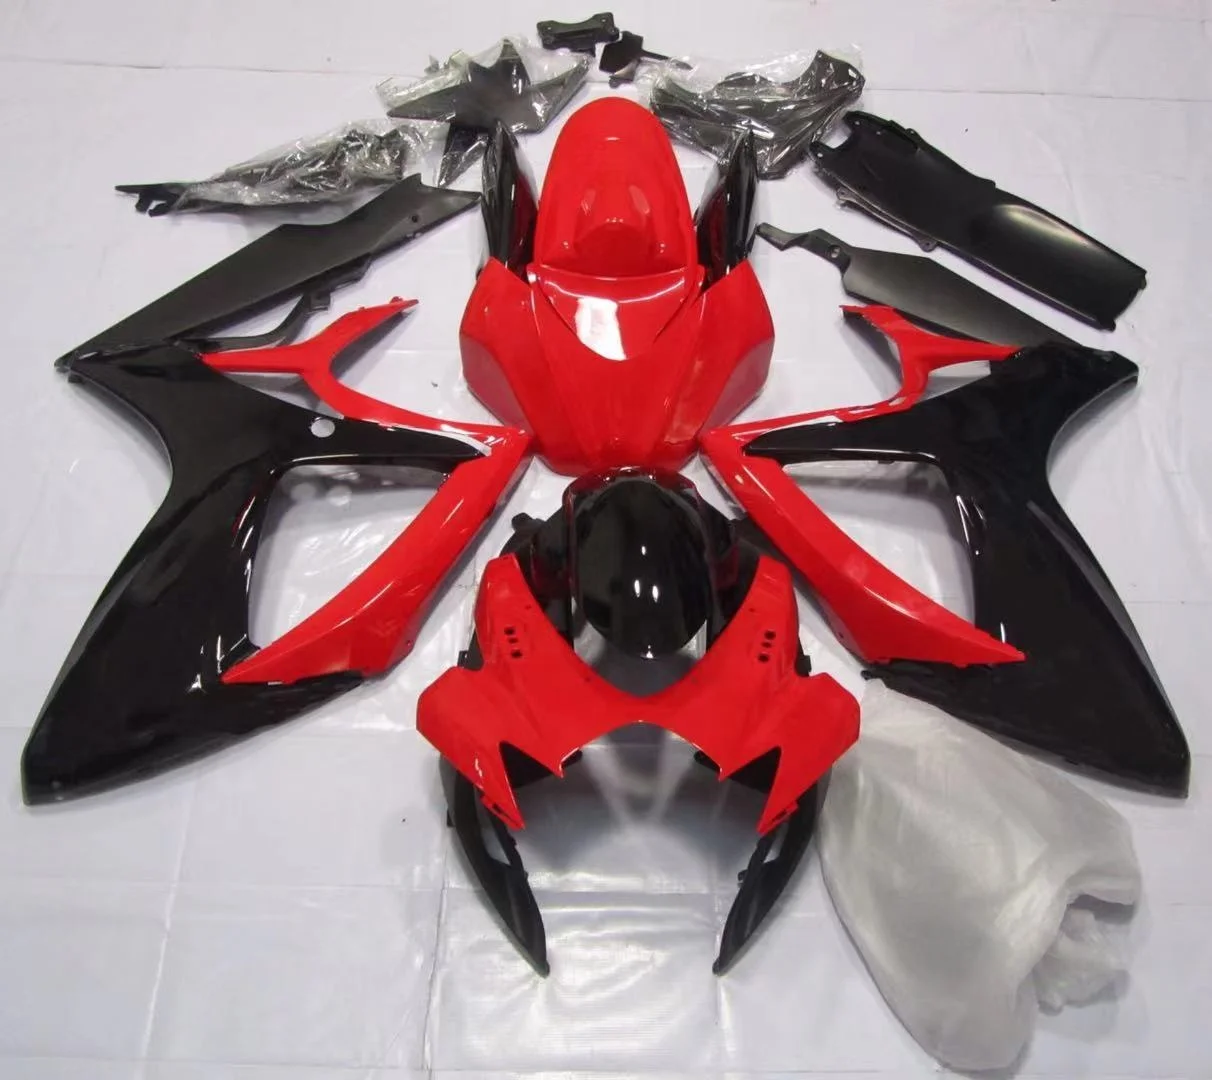 

2021 WHSC best Motorcycle ABS Plastic Fairing Kit For SUZUKI GSXR600-750 2006-2007, Pictures shown